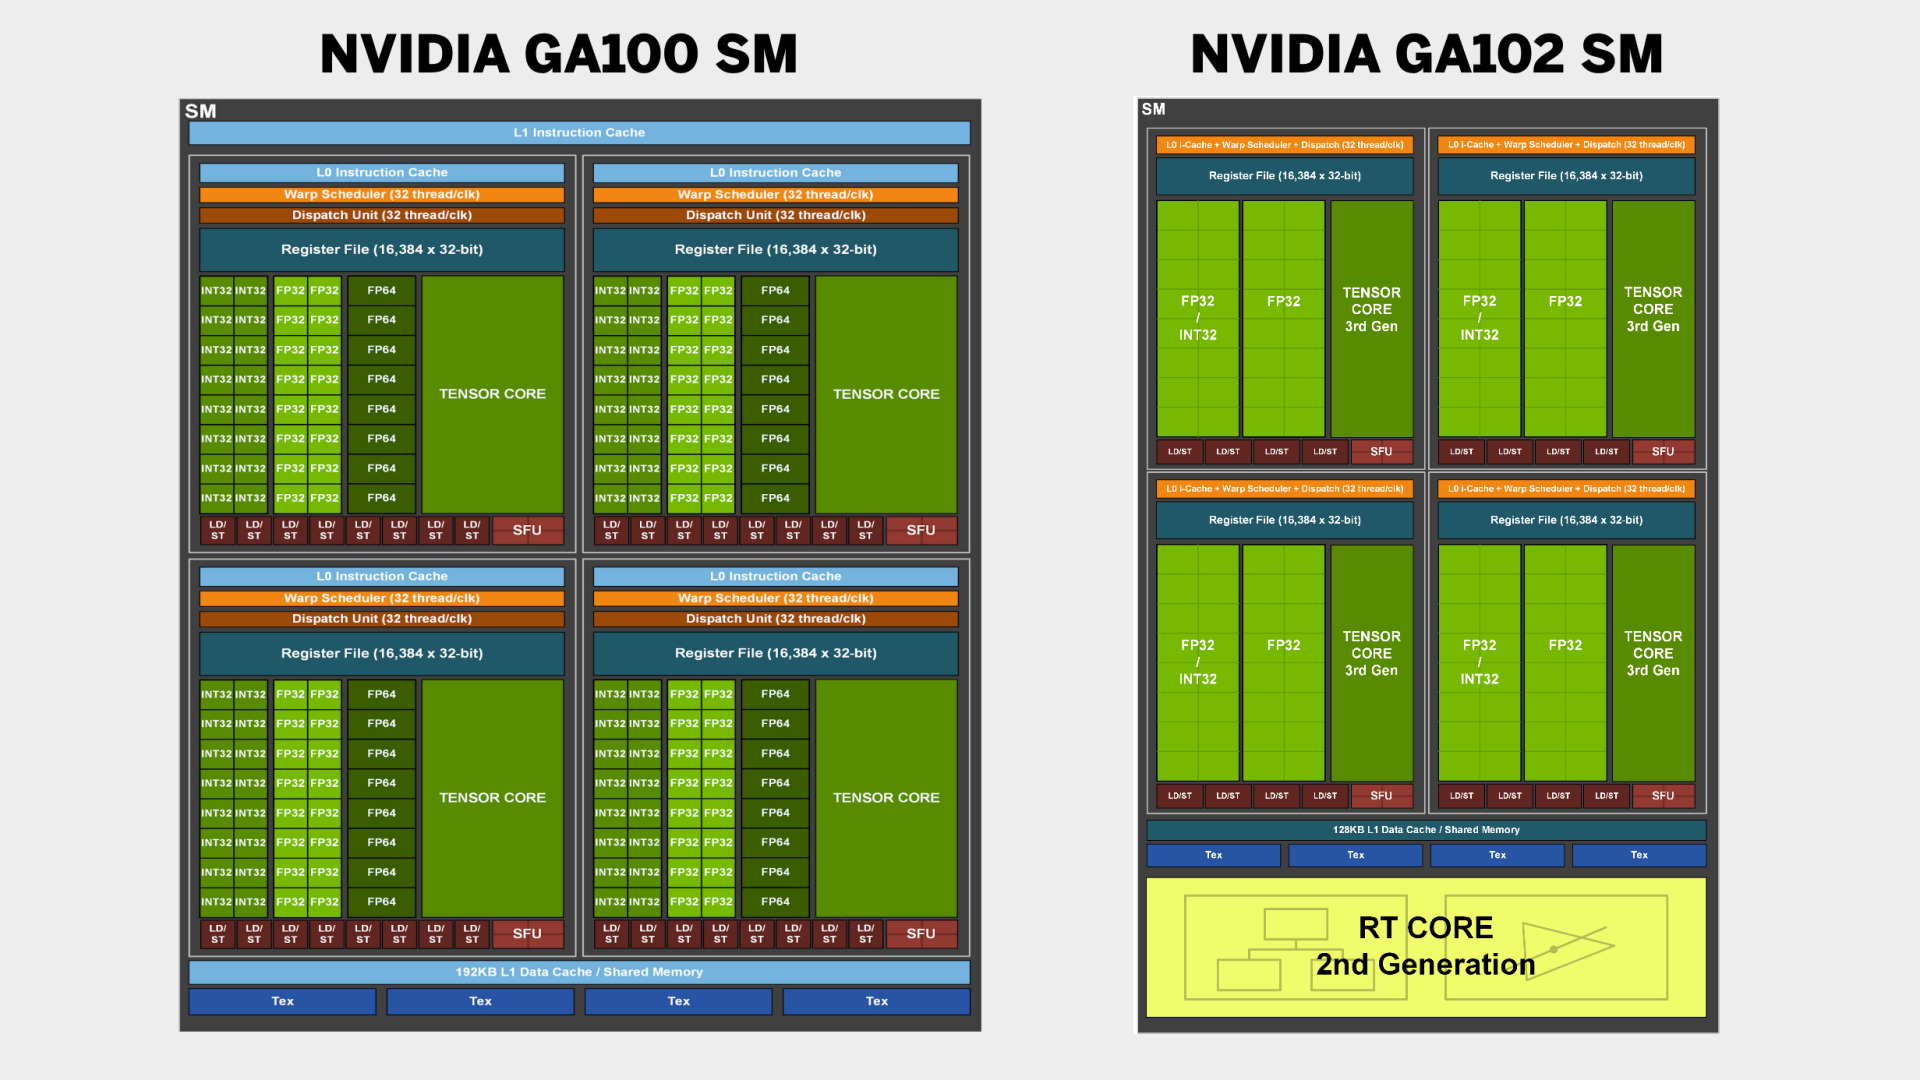 Comparison between the Tesla and GeForce versions of Ampere's streaming multiprocessor